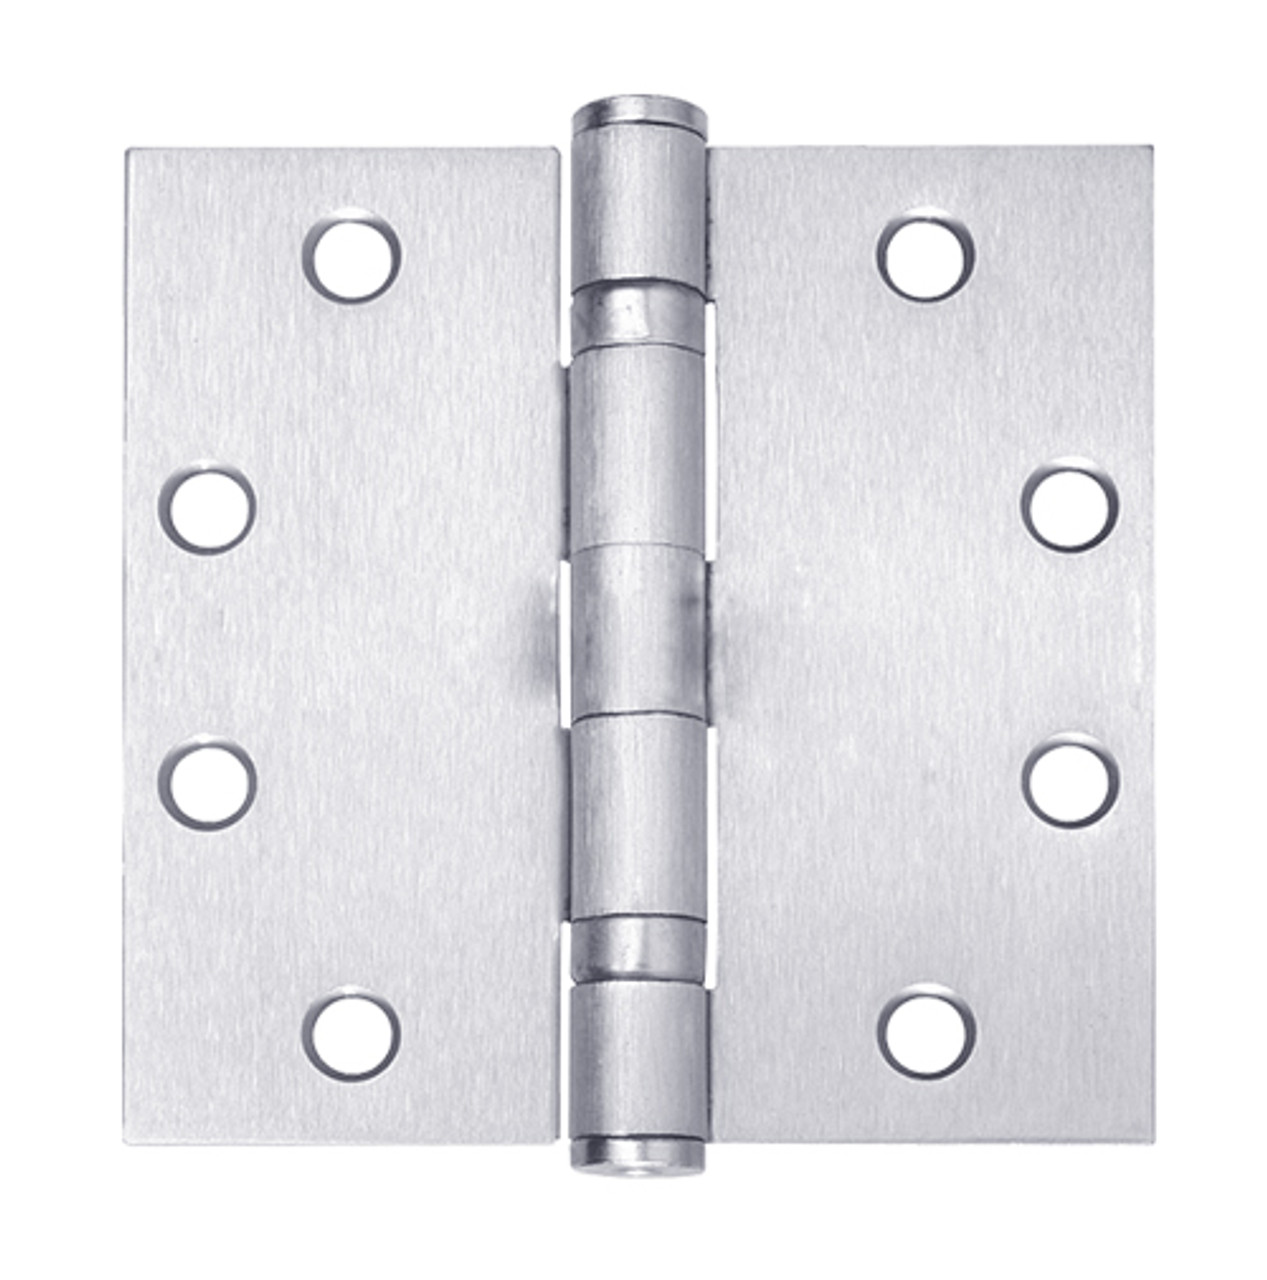 5BB1-5x5-625-NRP IVES 5 Knuckle Ball Bearing Full Mortise Hinge in Bright Chrome